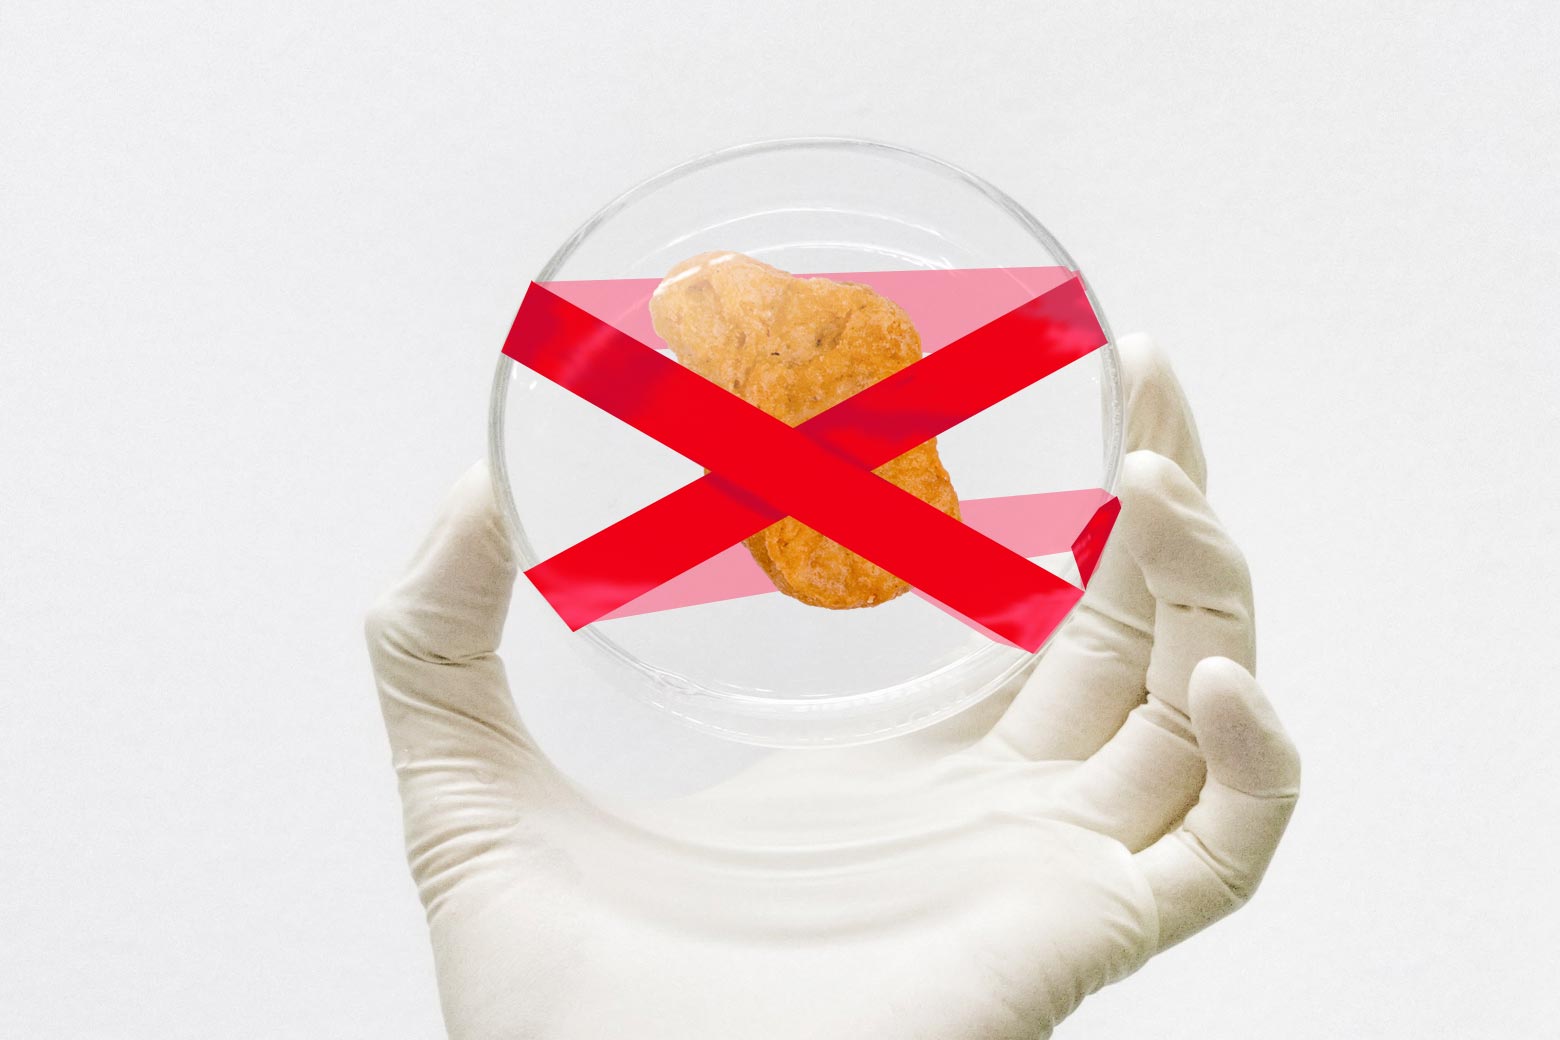 Image of a gloved hand holding a Petri dish with a chicken nugget inside covered by red tape.